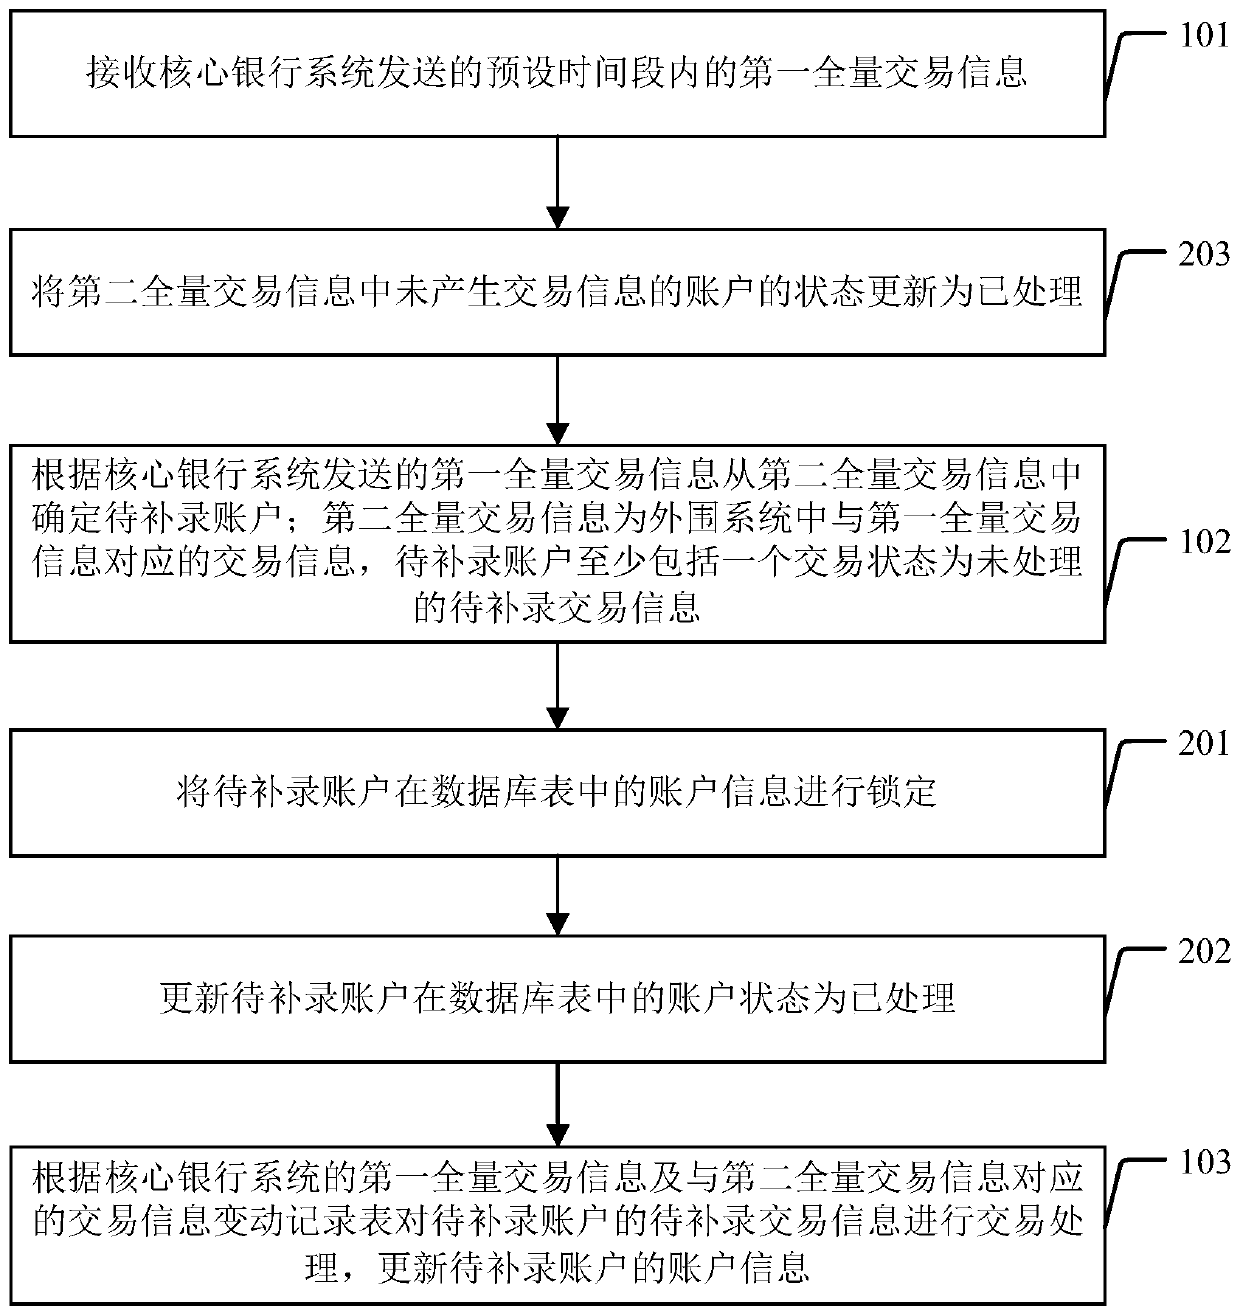 Transaction information processing method and system, and peripheral system